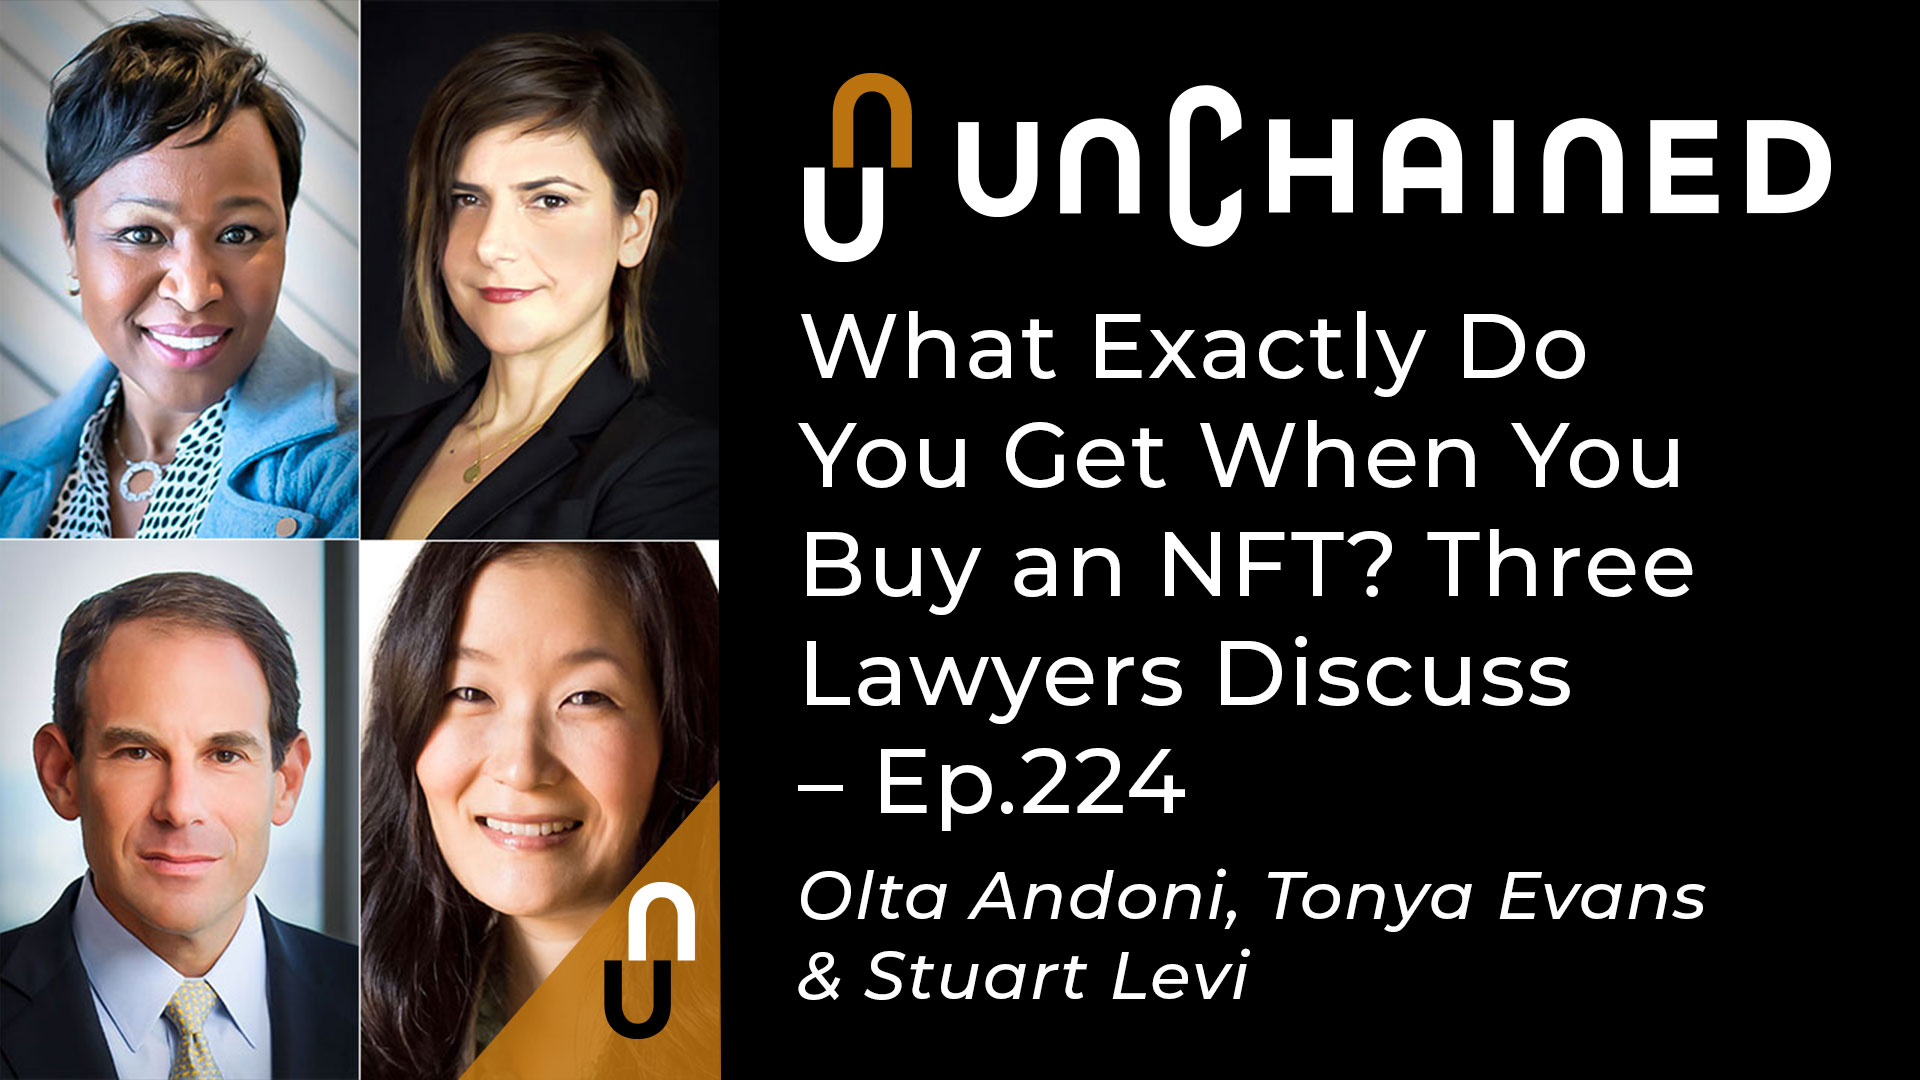 Unchained - Ep.224 - What Exactly Do You Get When You Buy an NFT - Three Lawyers Discuss